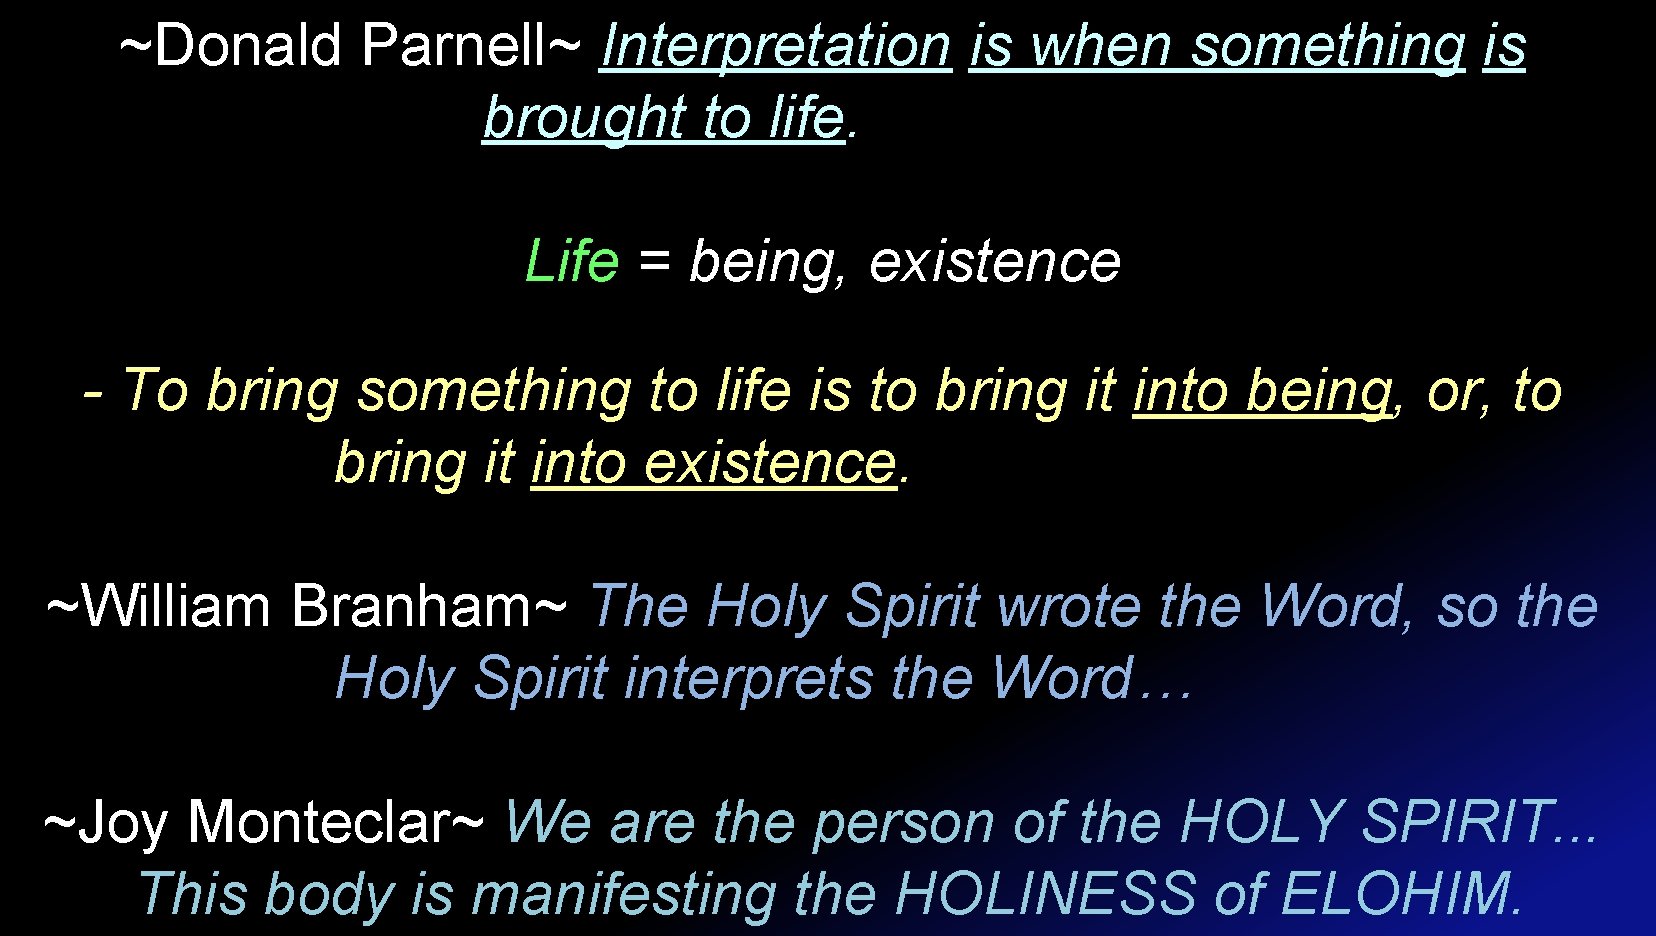 ~Donald Parnell~ Interpretation is when something is brought to life. Life = being, existence